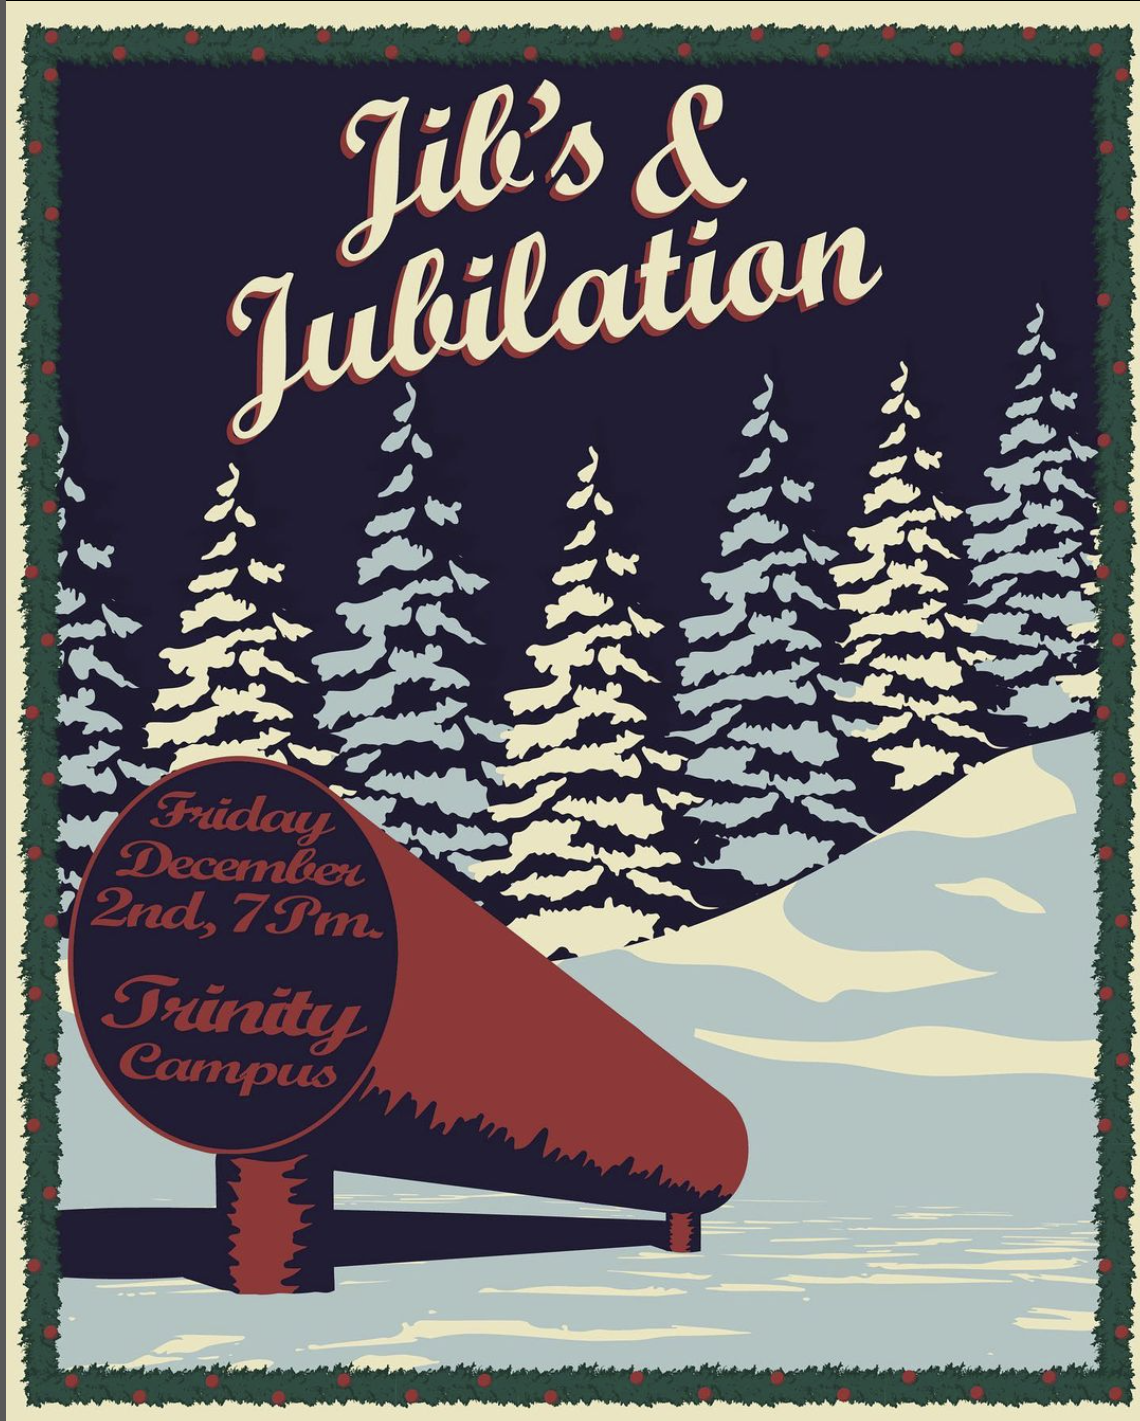 Graphic of a snowy hill with trees reading "Jib's and Jubilation"